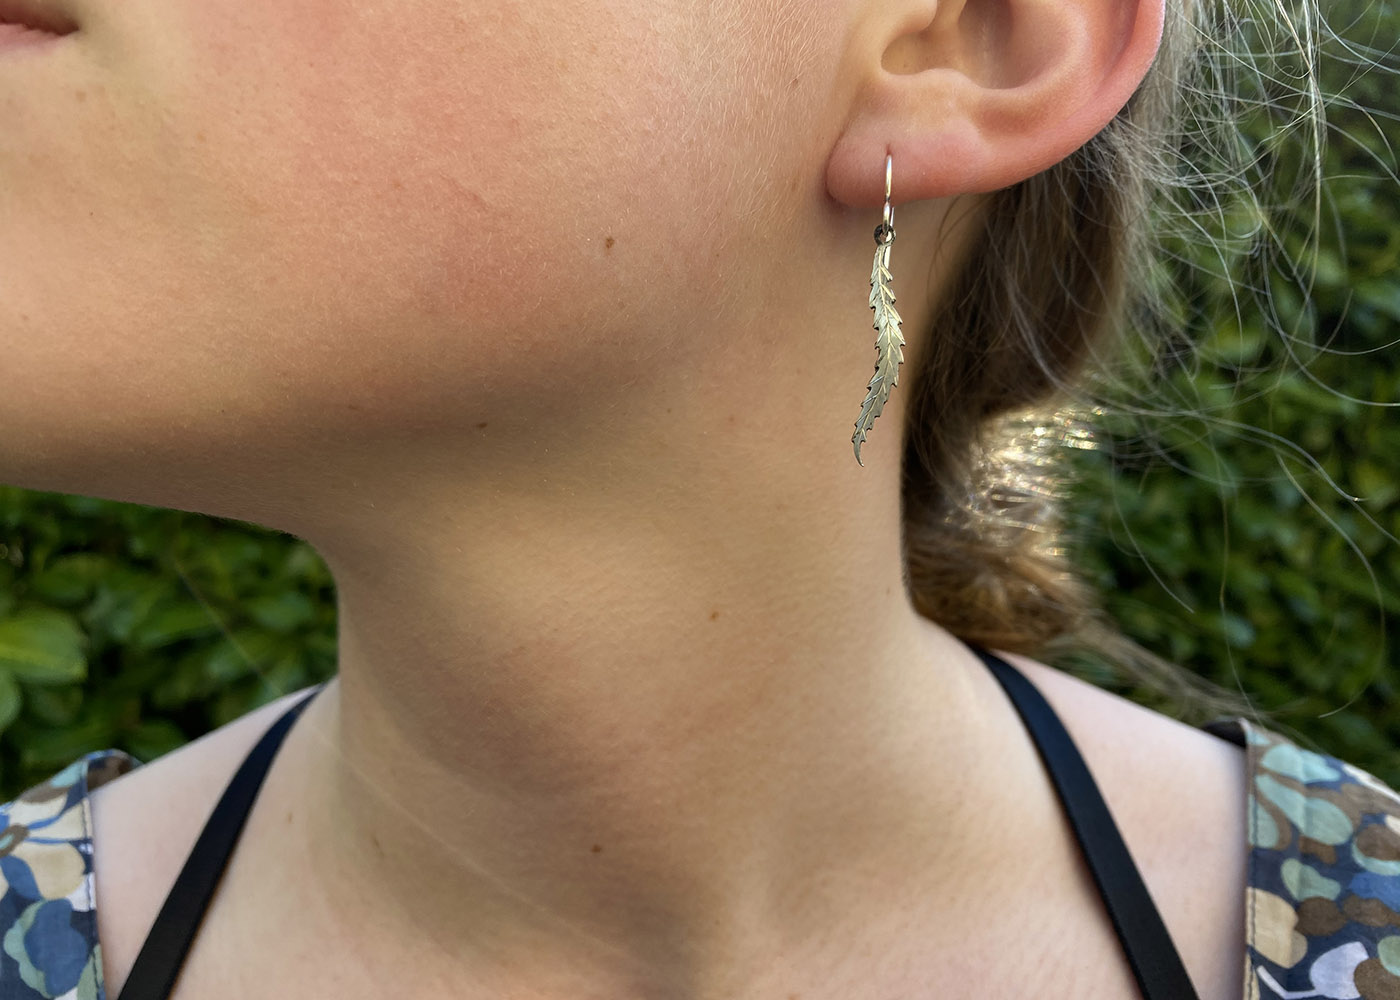 Willow Tree jewellery - Willow leaf earrings handcrafted and recycled from silver shillings. 